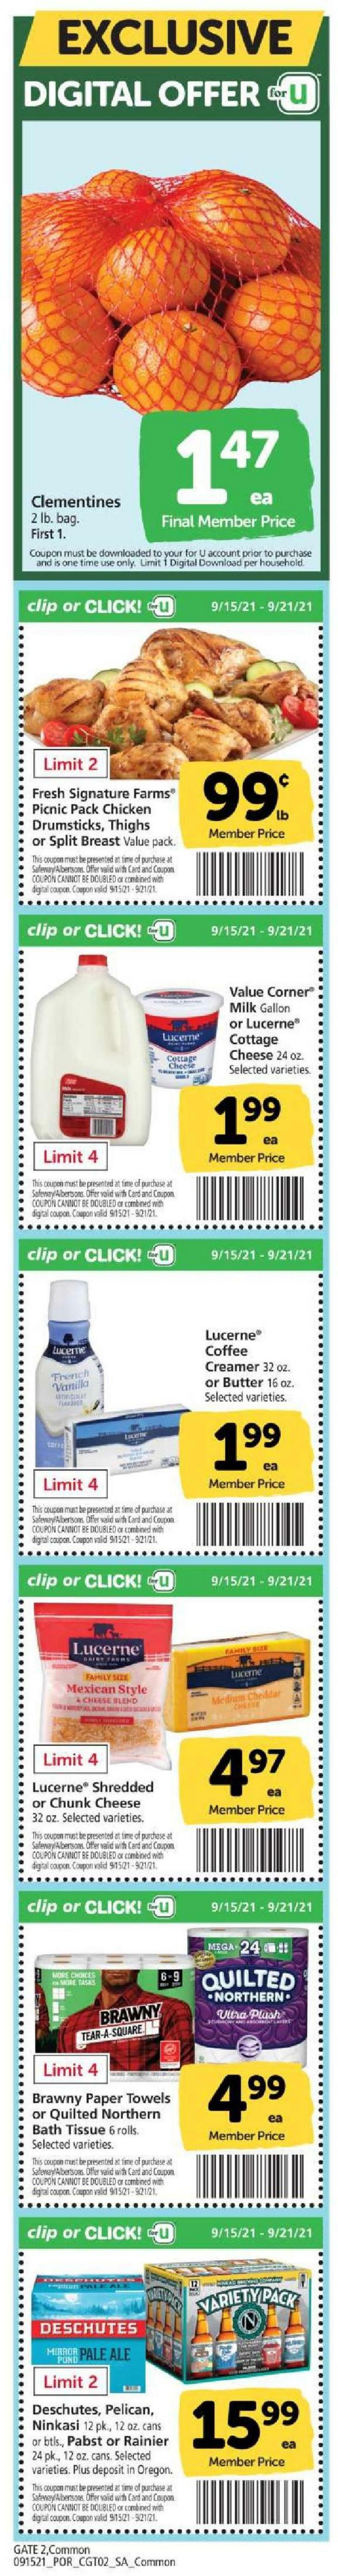 Albertsons Weekly Ad from September 15